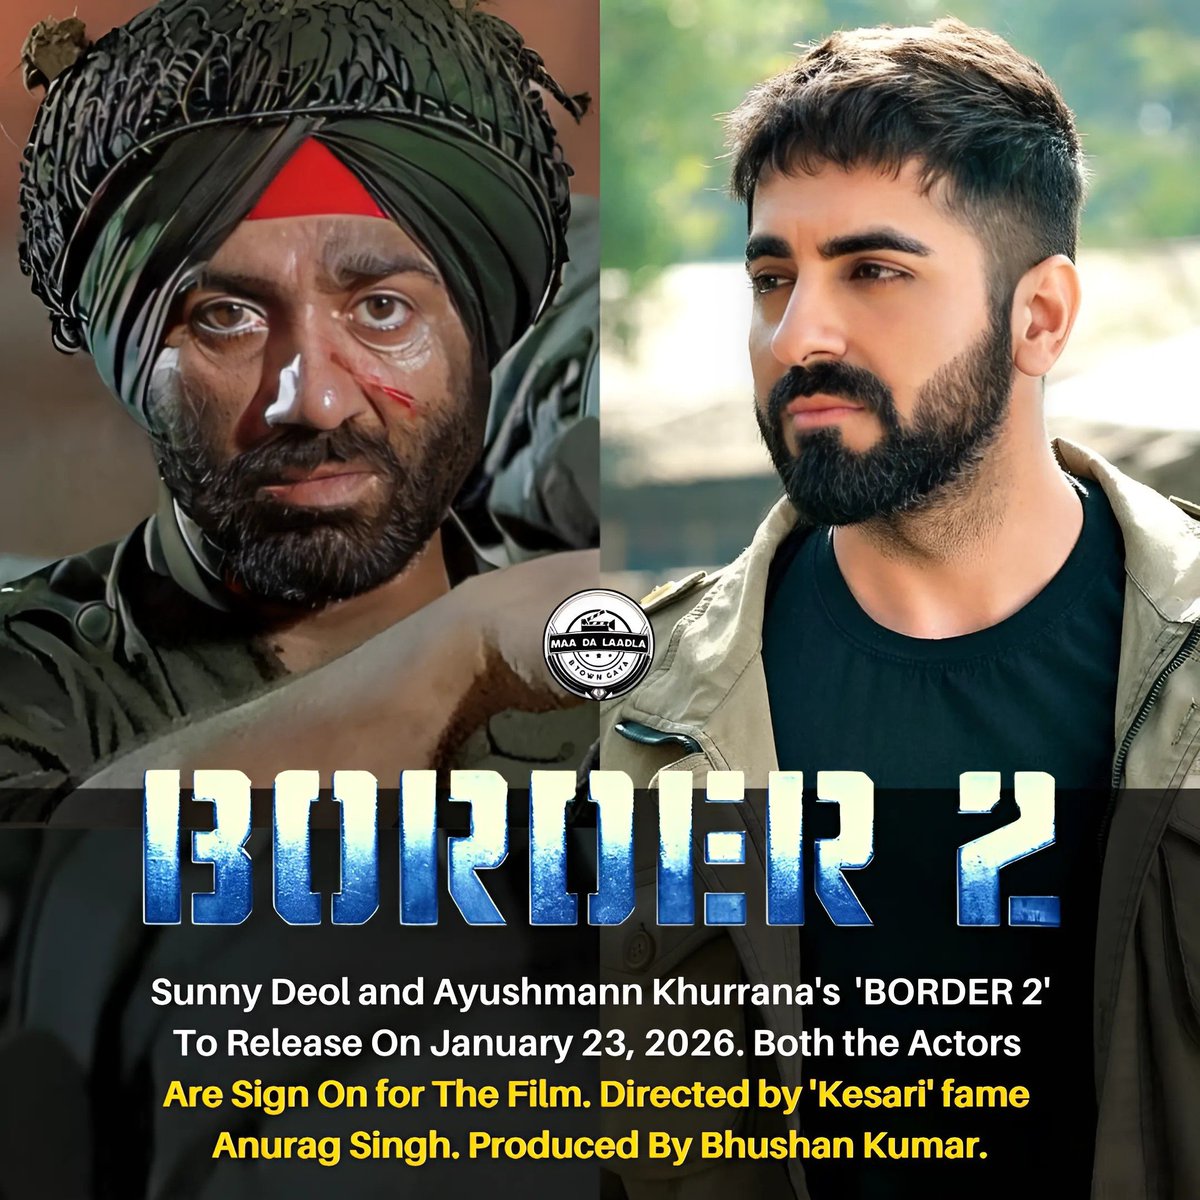 #Border2 is expected to be the largest #WarFilm in #IndianCinema History. 🔥🔥🔥

The Creators will spare no effort to create a film that honours the memory of the first one. The film has been a work in progress for more than a year, and writers have cracked screenplay that live…